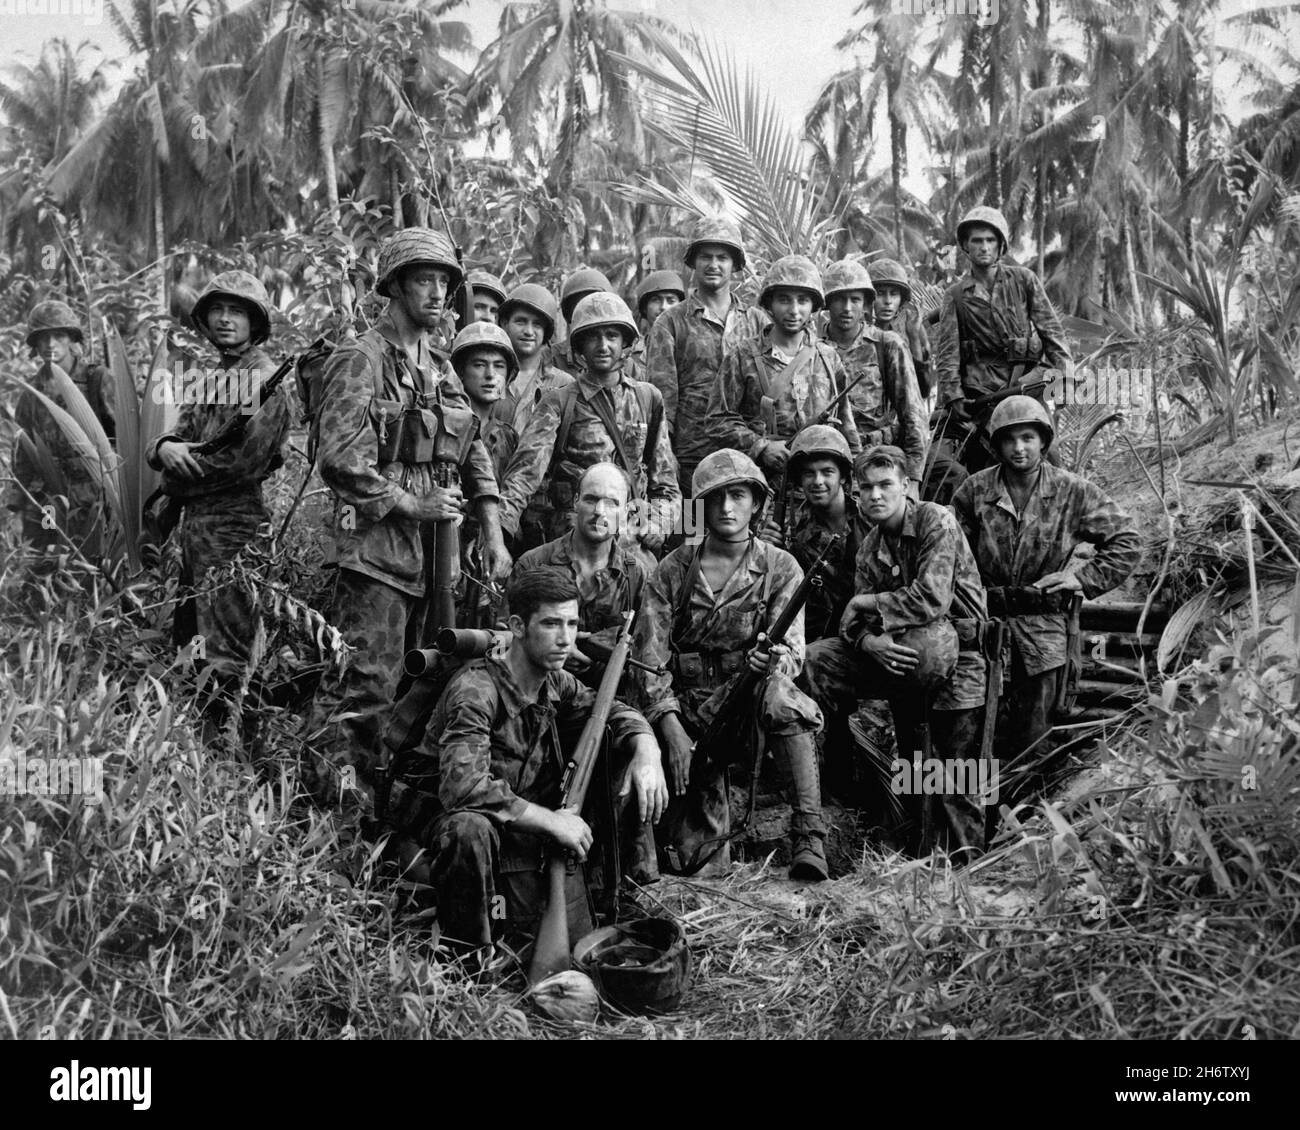 BOUGAINVILLE, PACIFIC OCEAN - January 1944 - These men have earned the bloody reputation of being skillful jungle fighters. They are US Marine Raiders Stock Photo